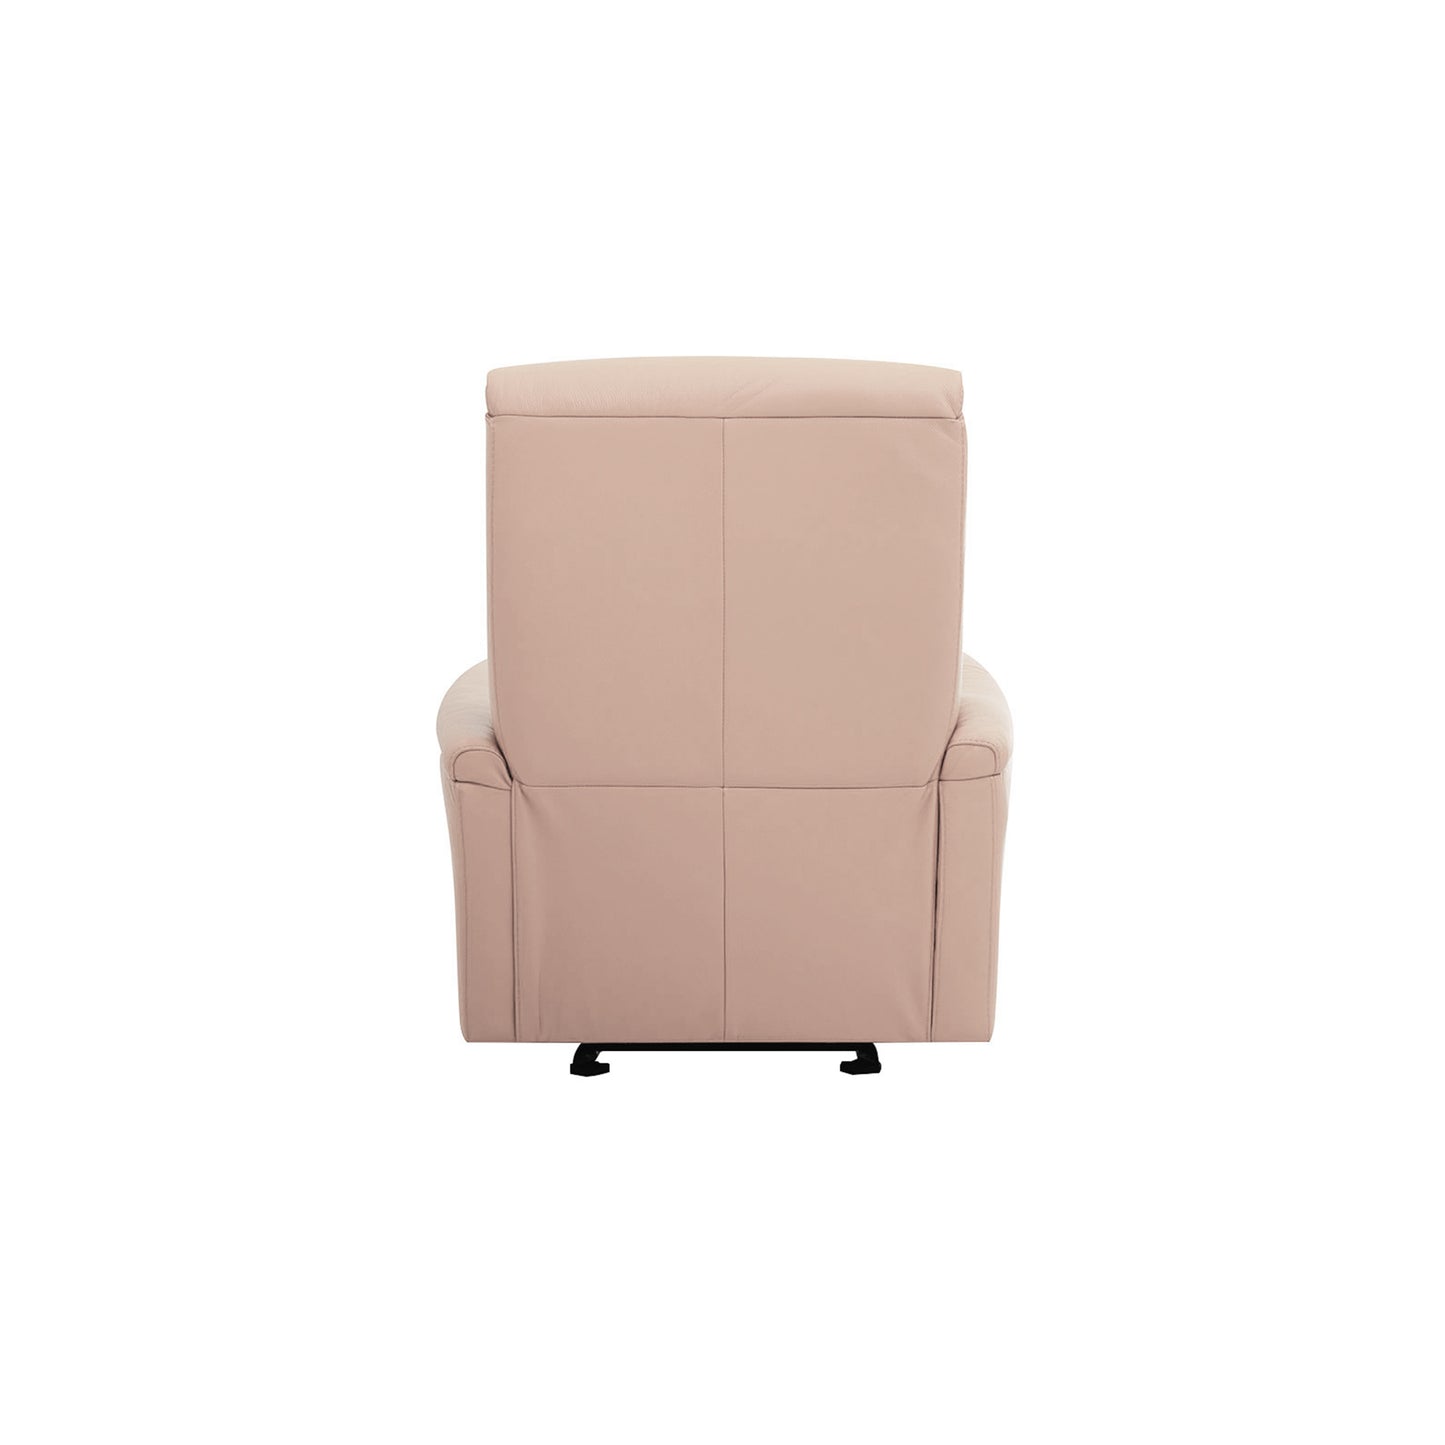 Ready Stock: Charleston Recliner Armchair in Light Pink Leather